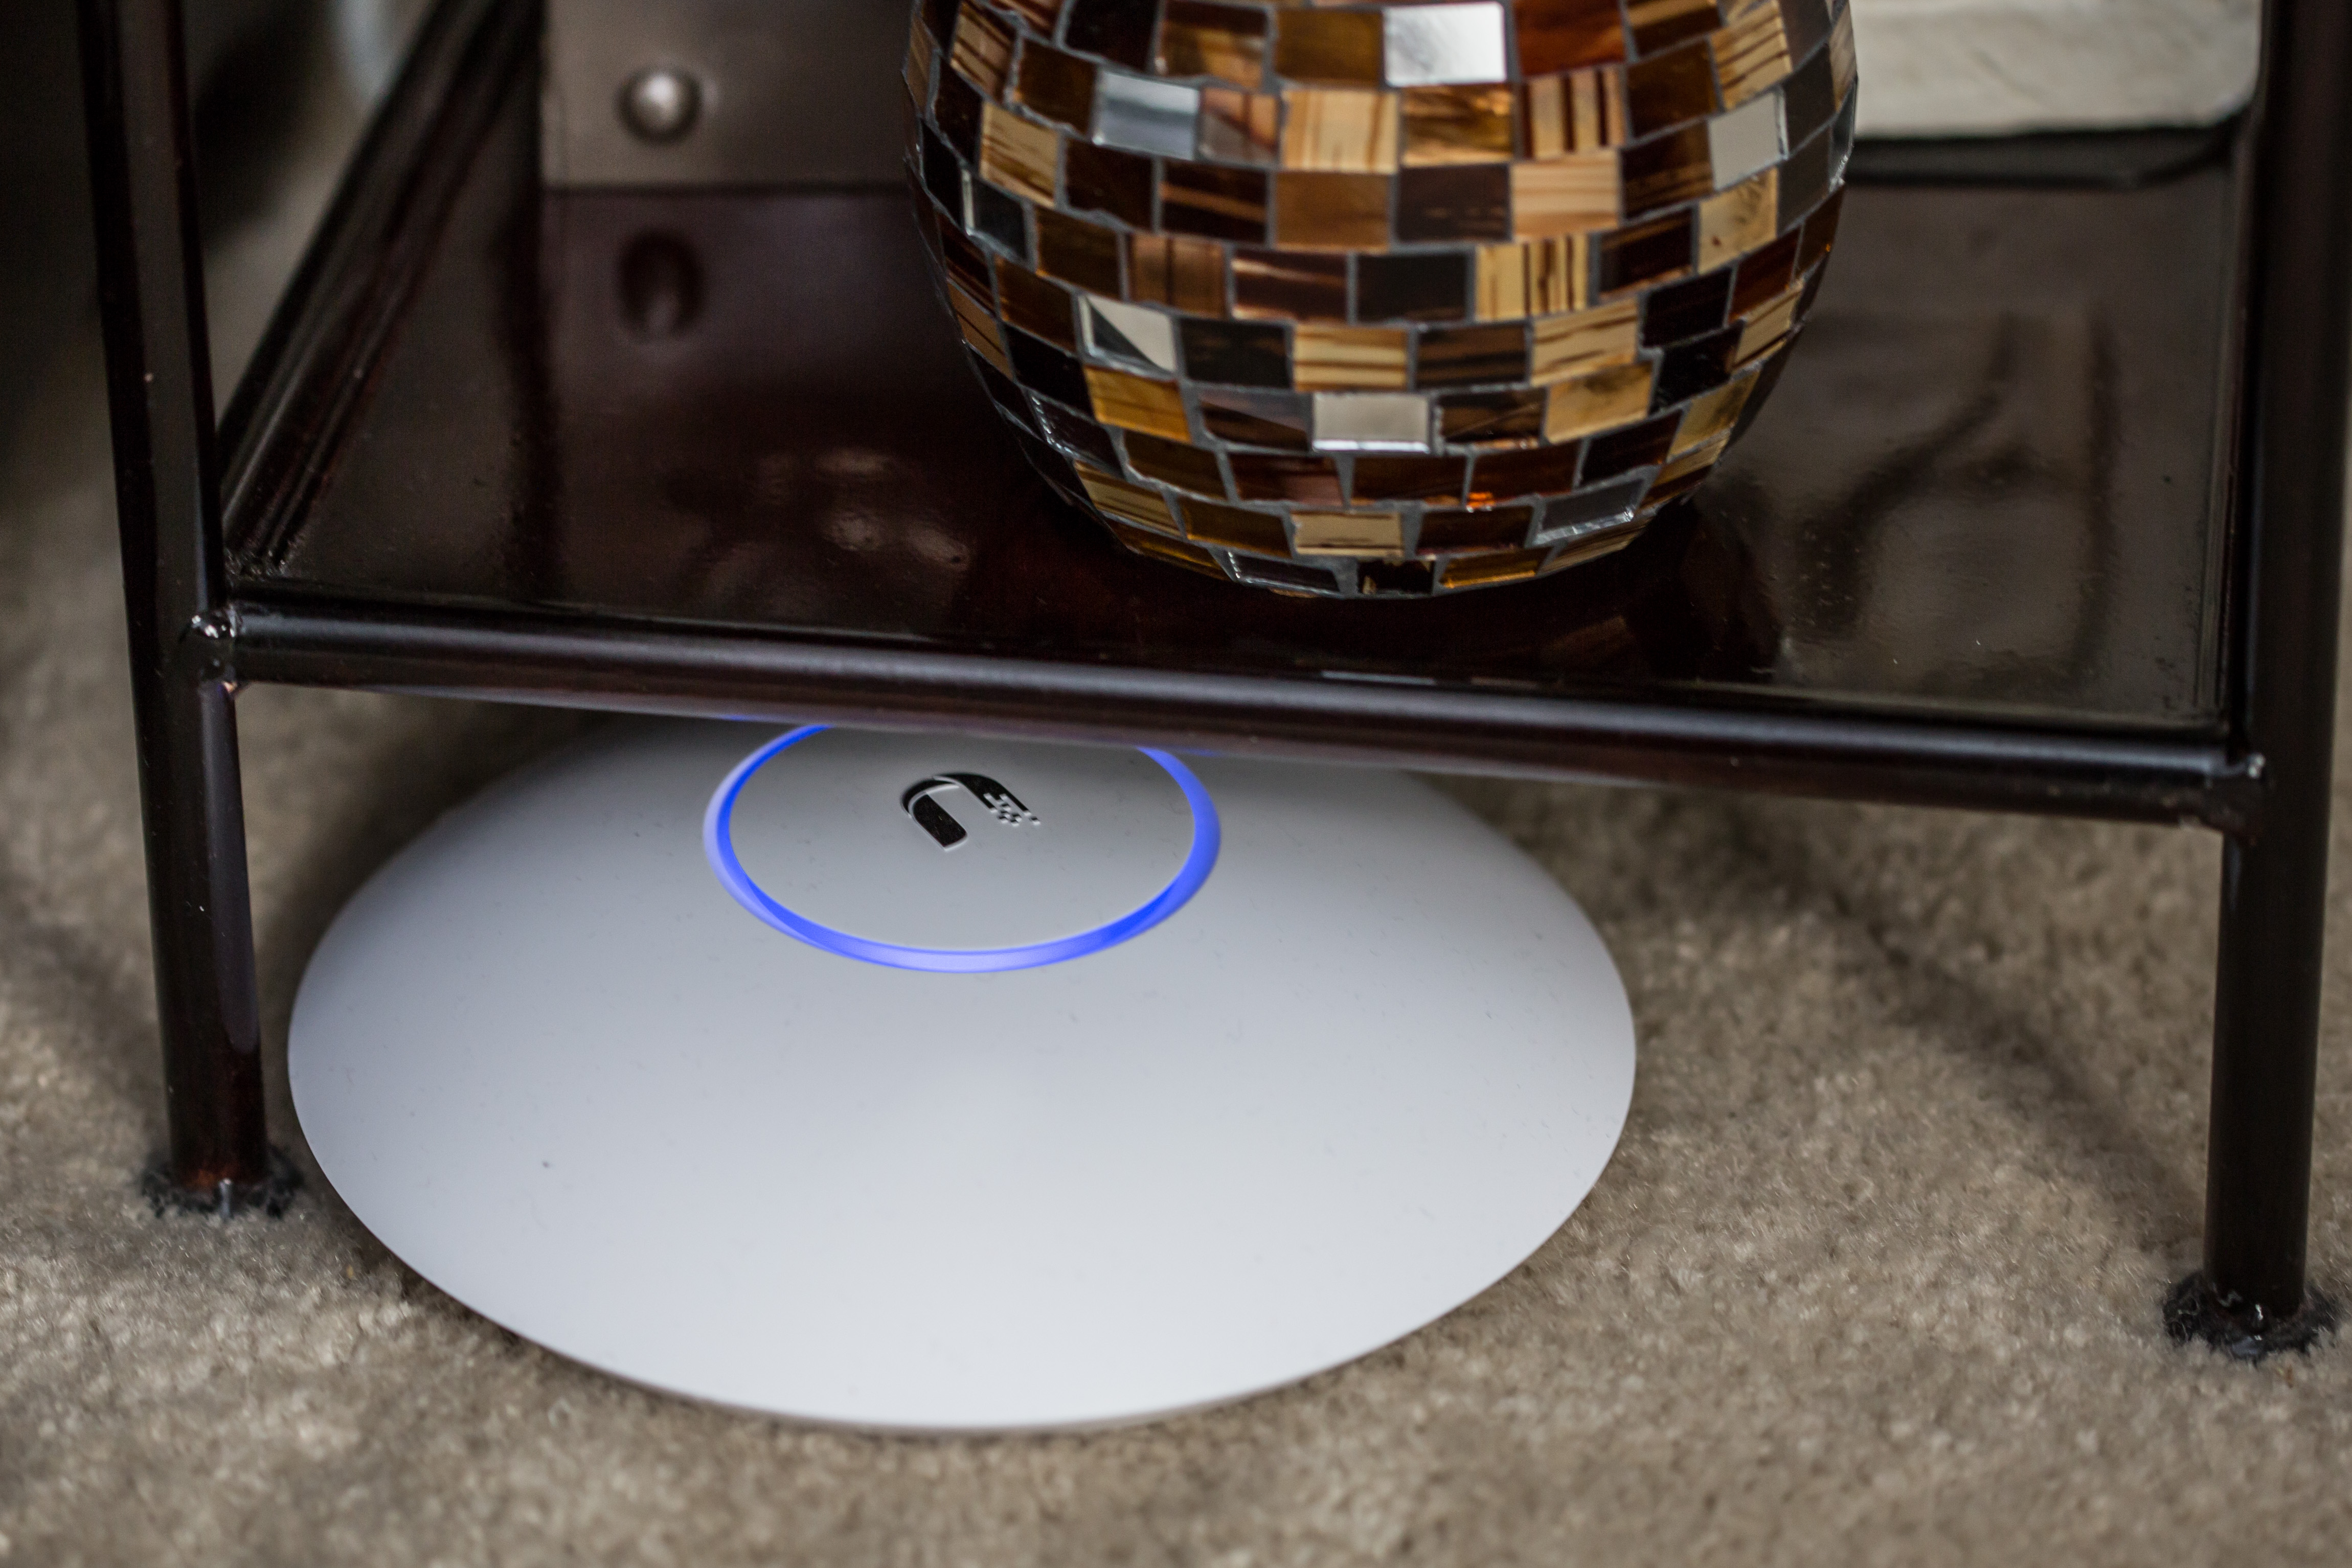 Haat Hoge blootstelling delicatesse Review: Ubiquiti UniFi made me realize how terrible consumer Wi-Fi gear is  | Ars Technica